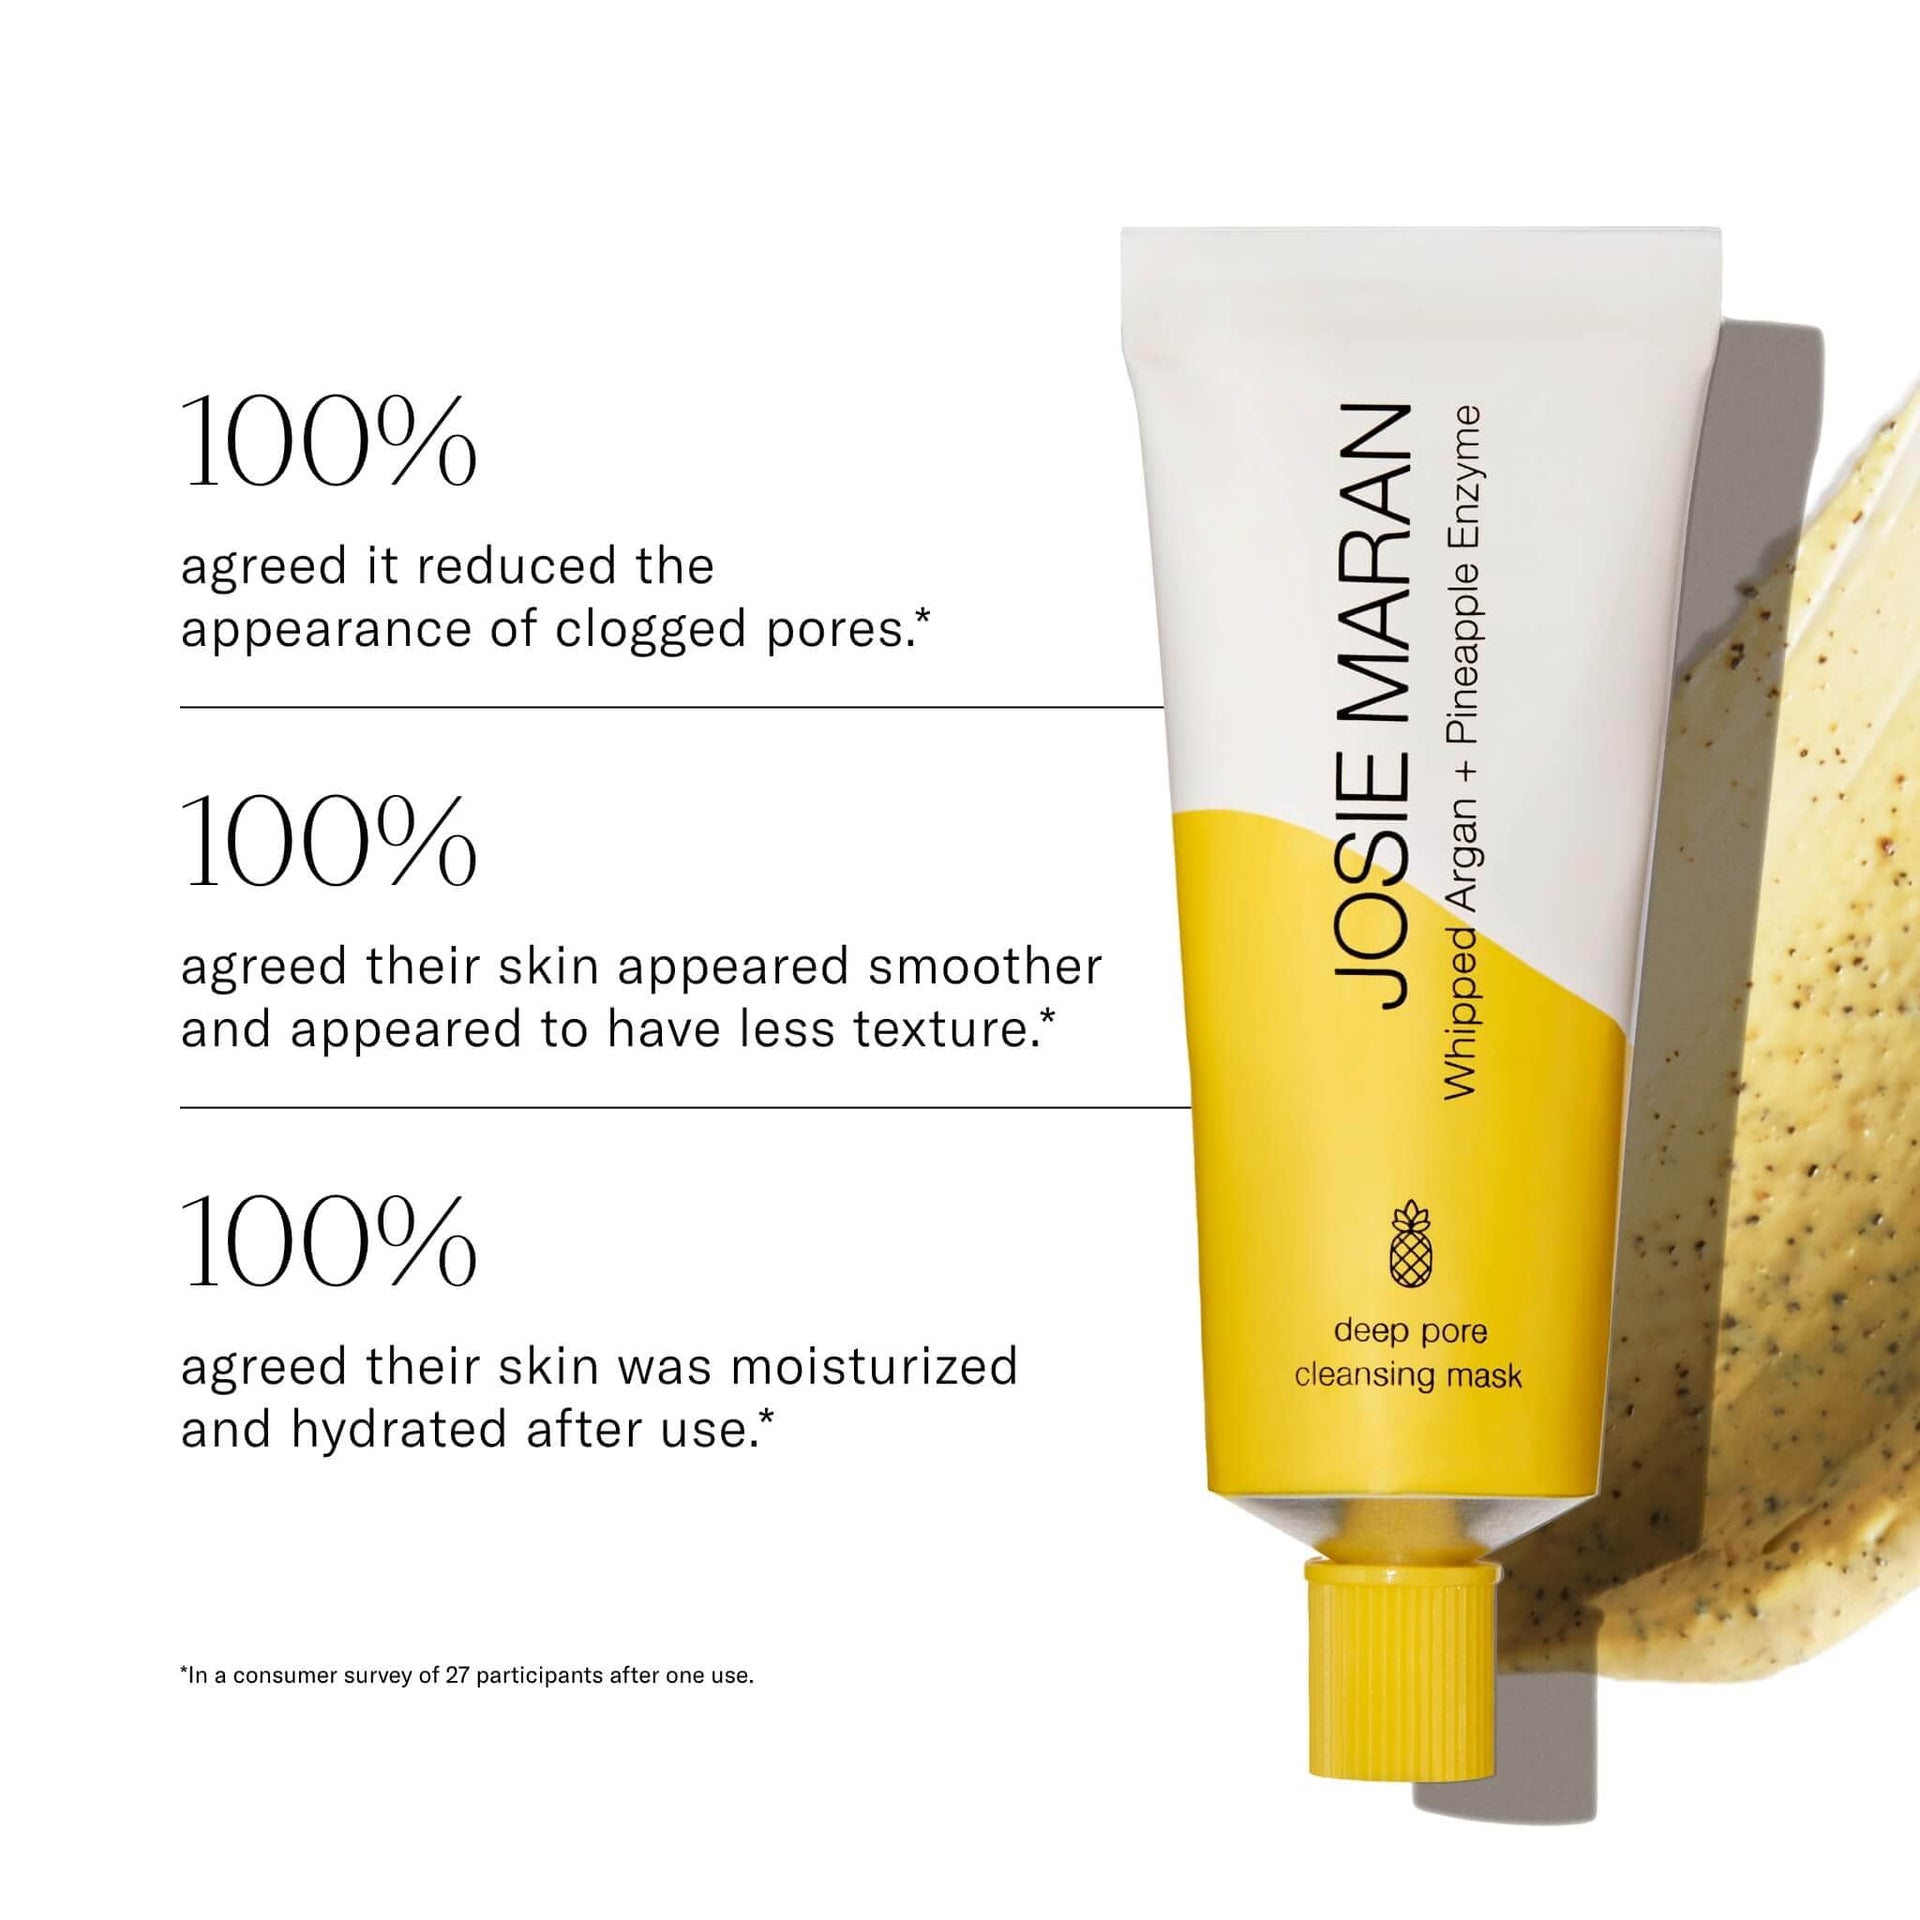 100% agreed reduced appearance of clogged pores. 100% agreed smoother skin and less texture. 